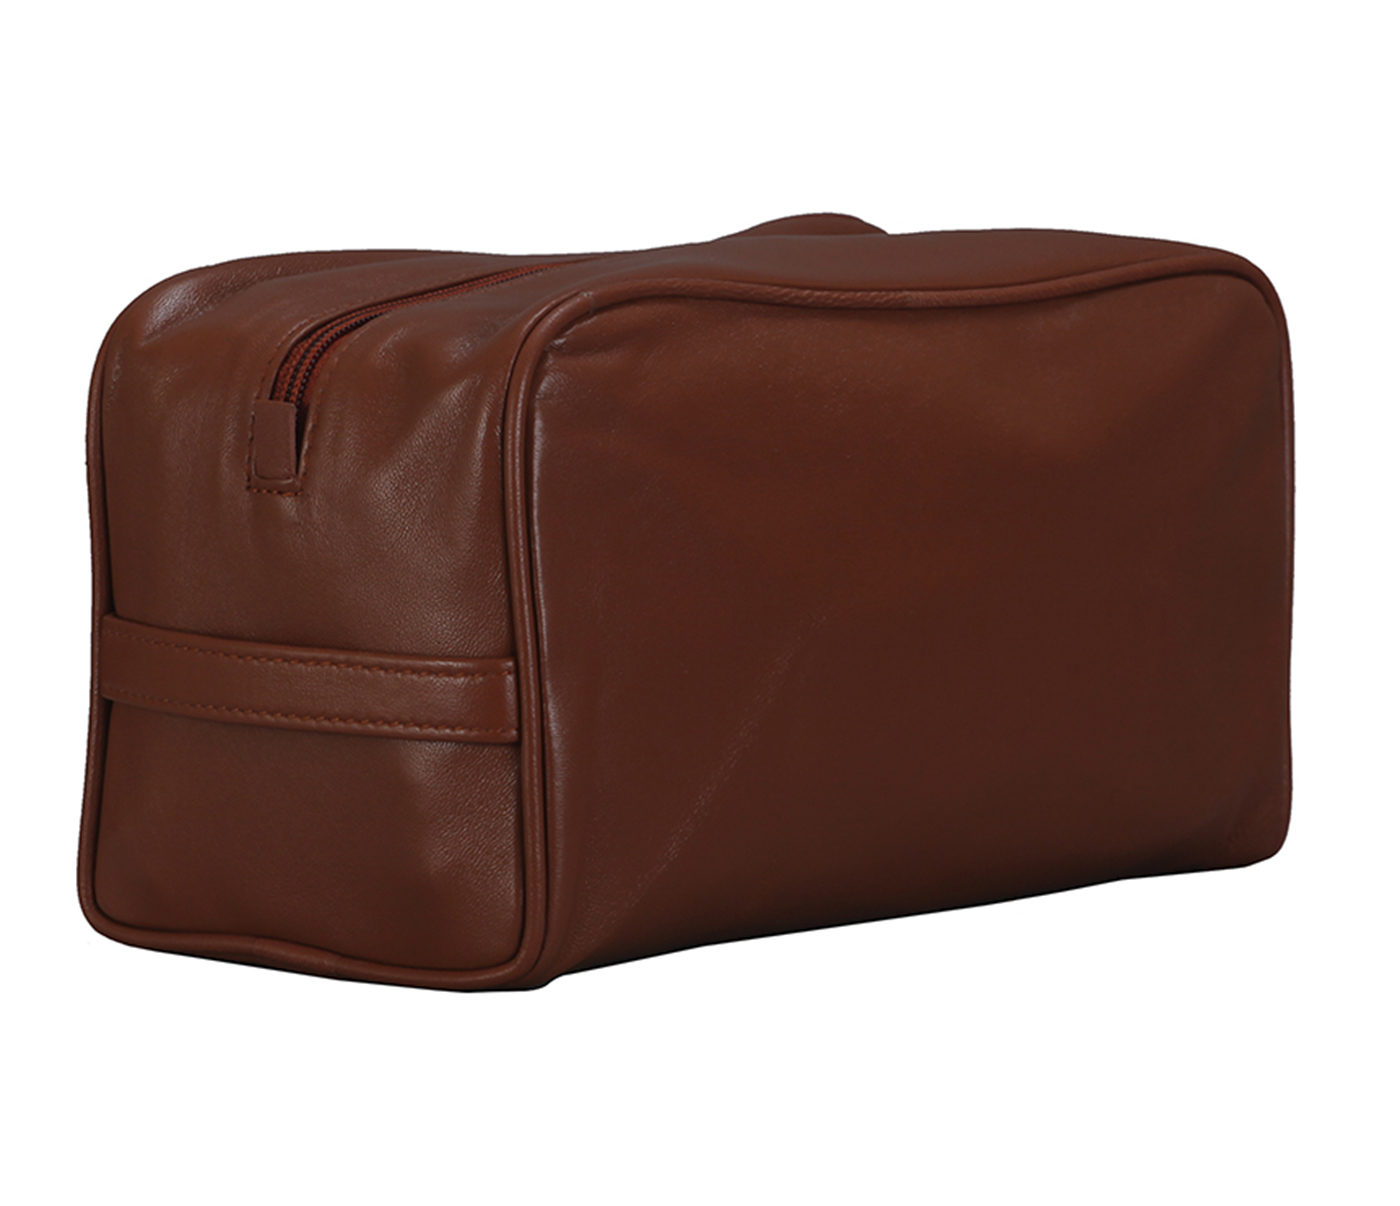 SC2--Unisex Wash & Toiletry travel Bag in Genuine Leather - Tan